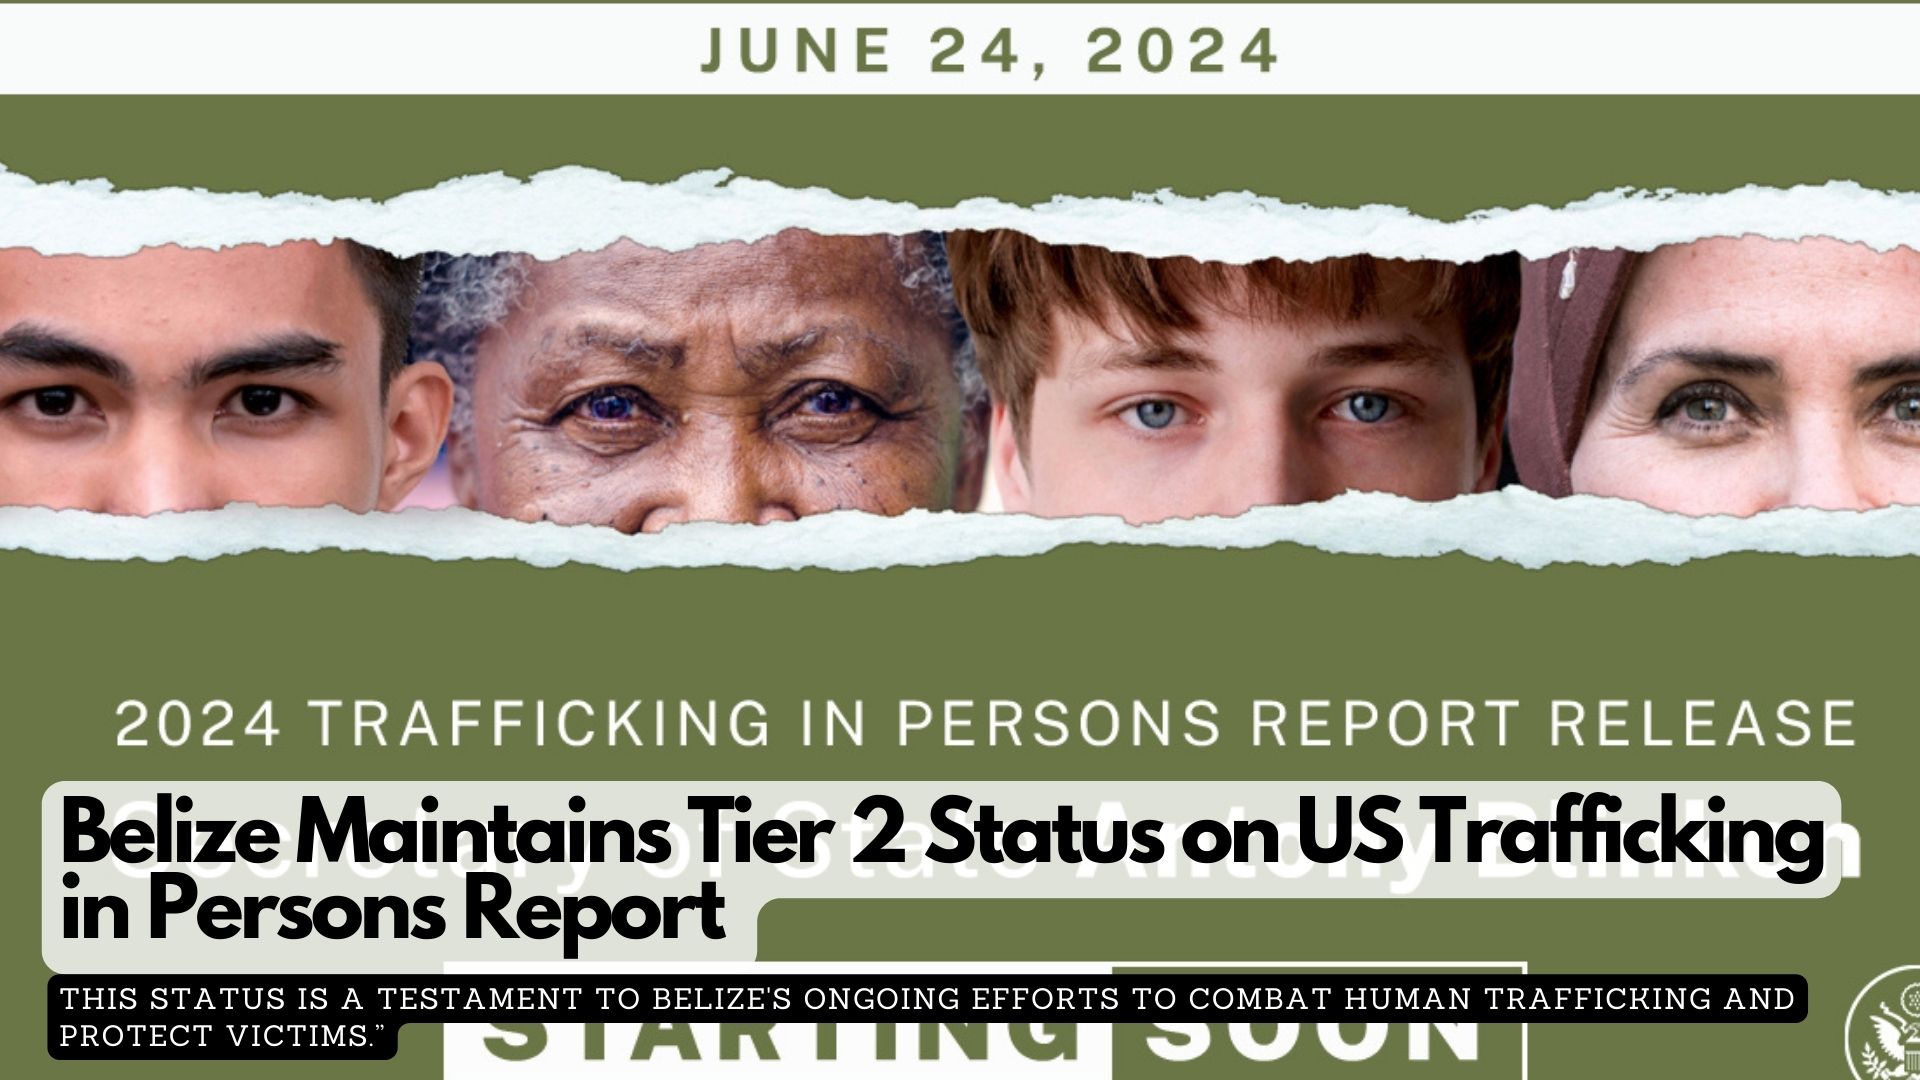 Belize Maintains Tier 2 Status on US Trafficking in Persons Report